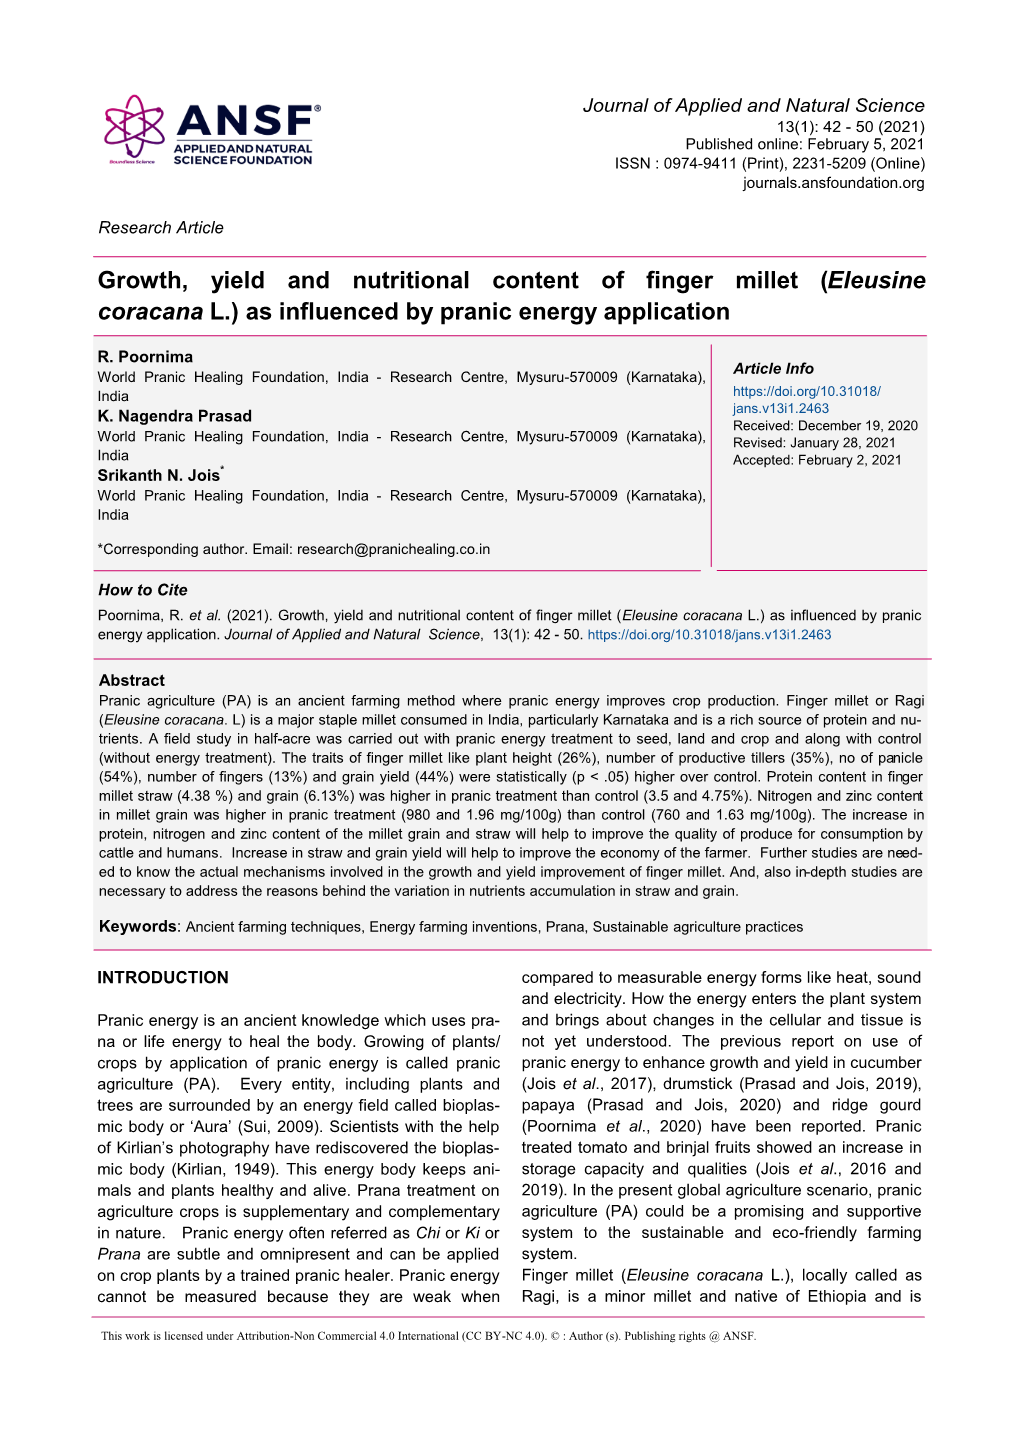 Growth, Yield and Nutritional Content of Finger Millet ( Eleusine Coracana L